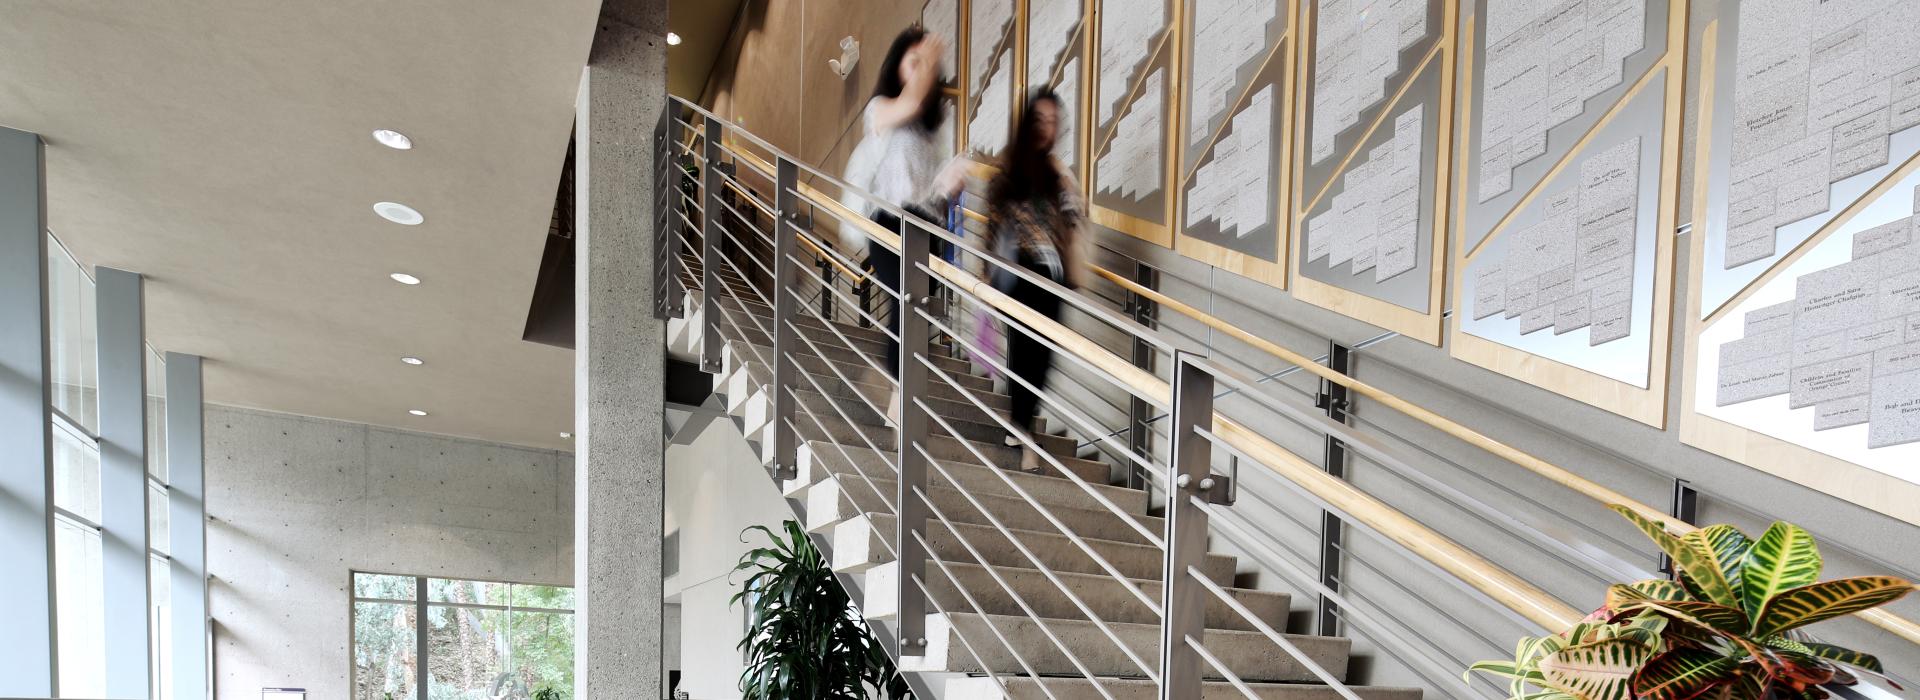 Students walking down library staircase